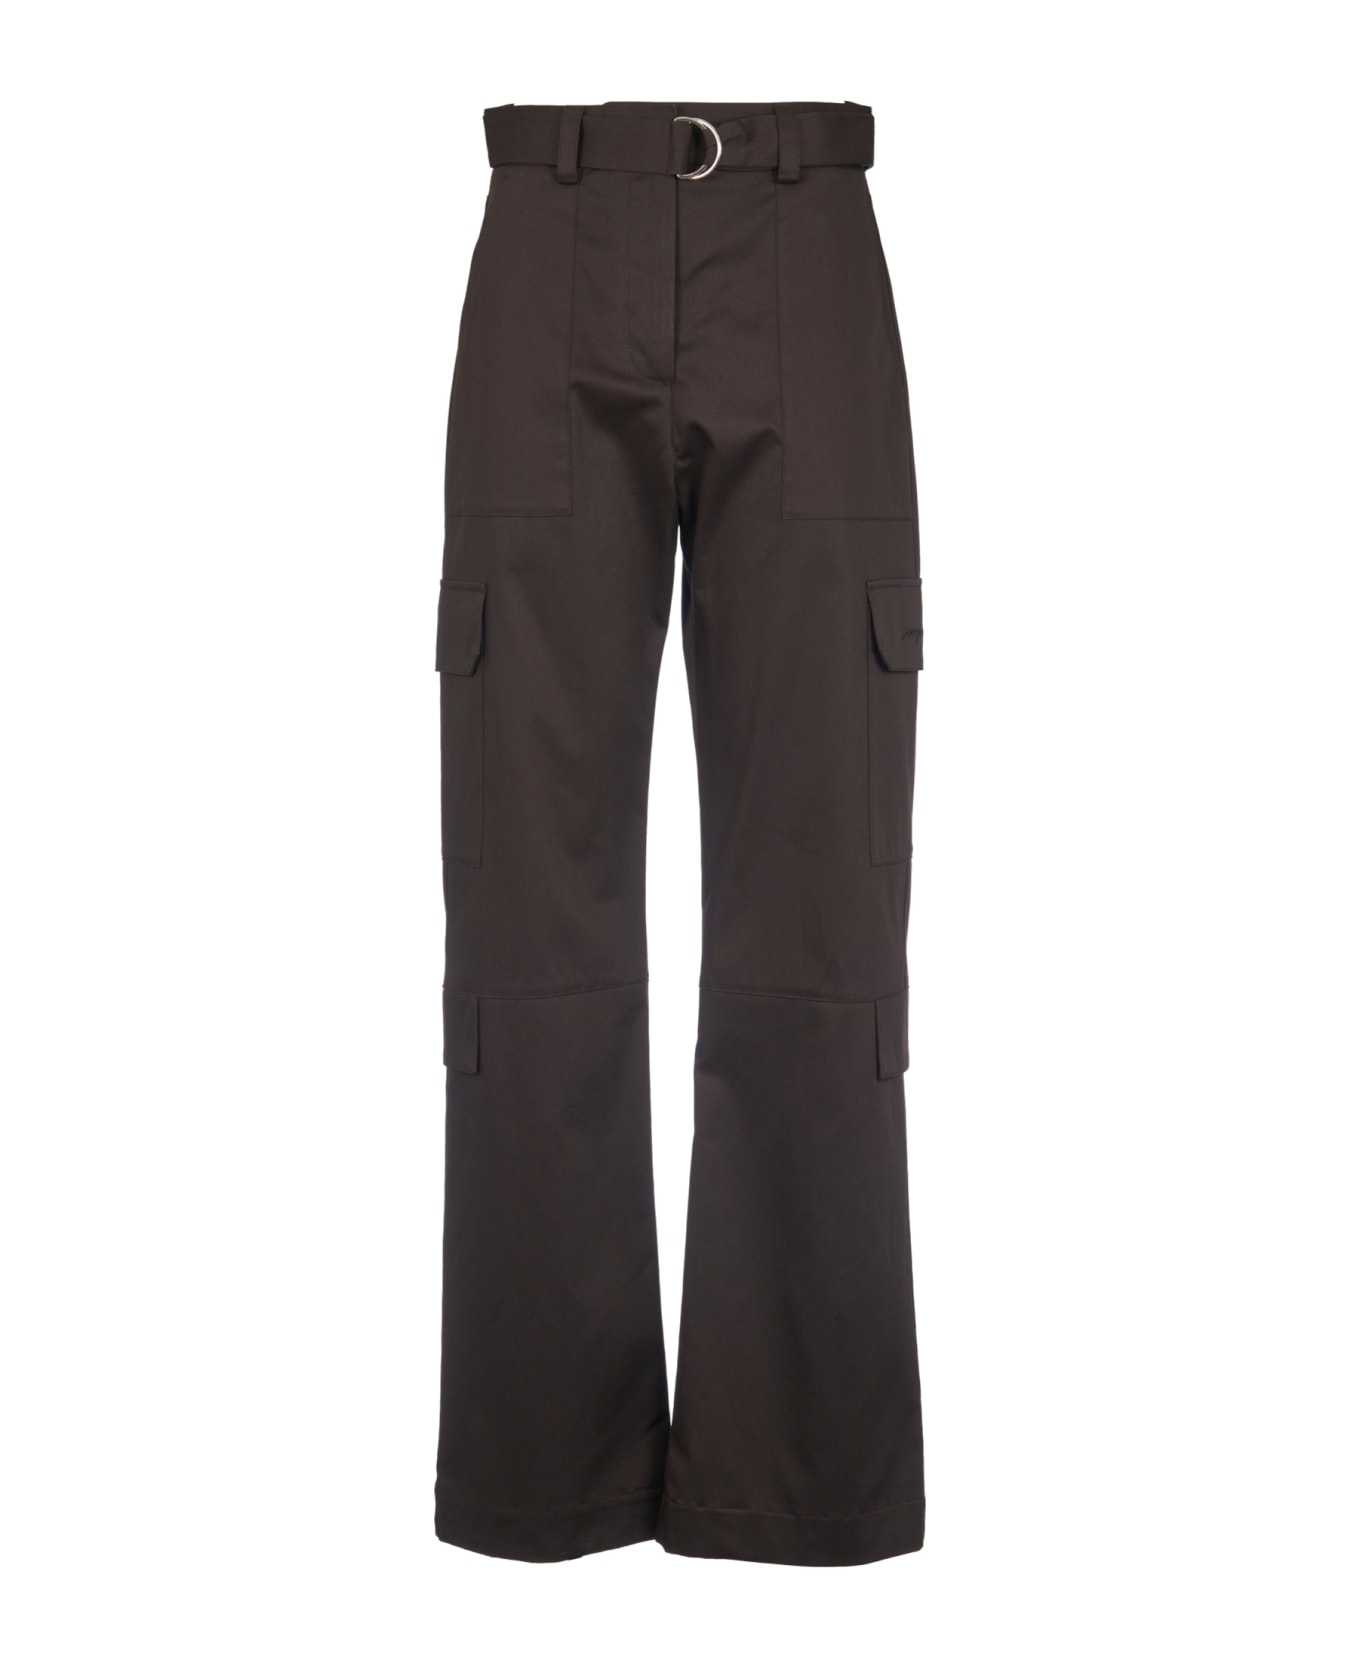 MSGM Belted Cargo Trousers - Brown